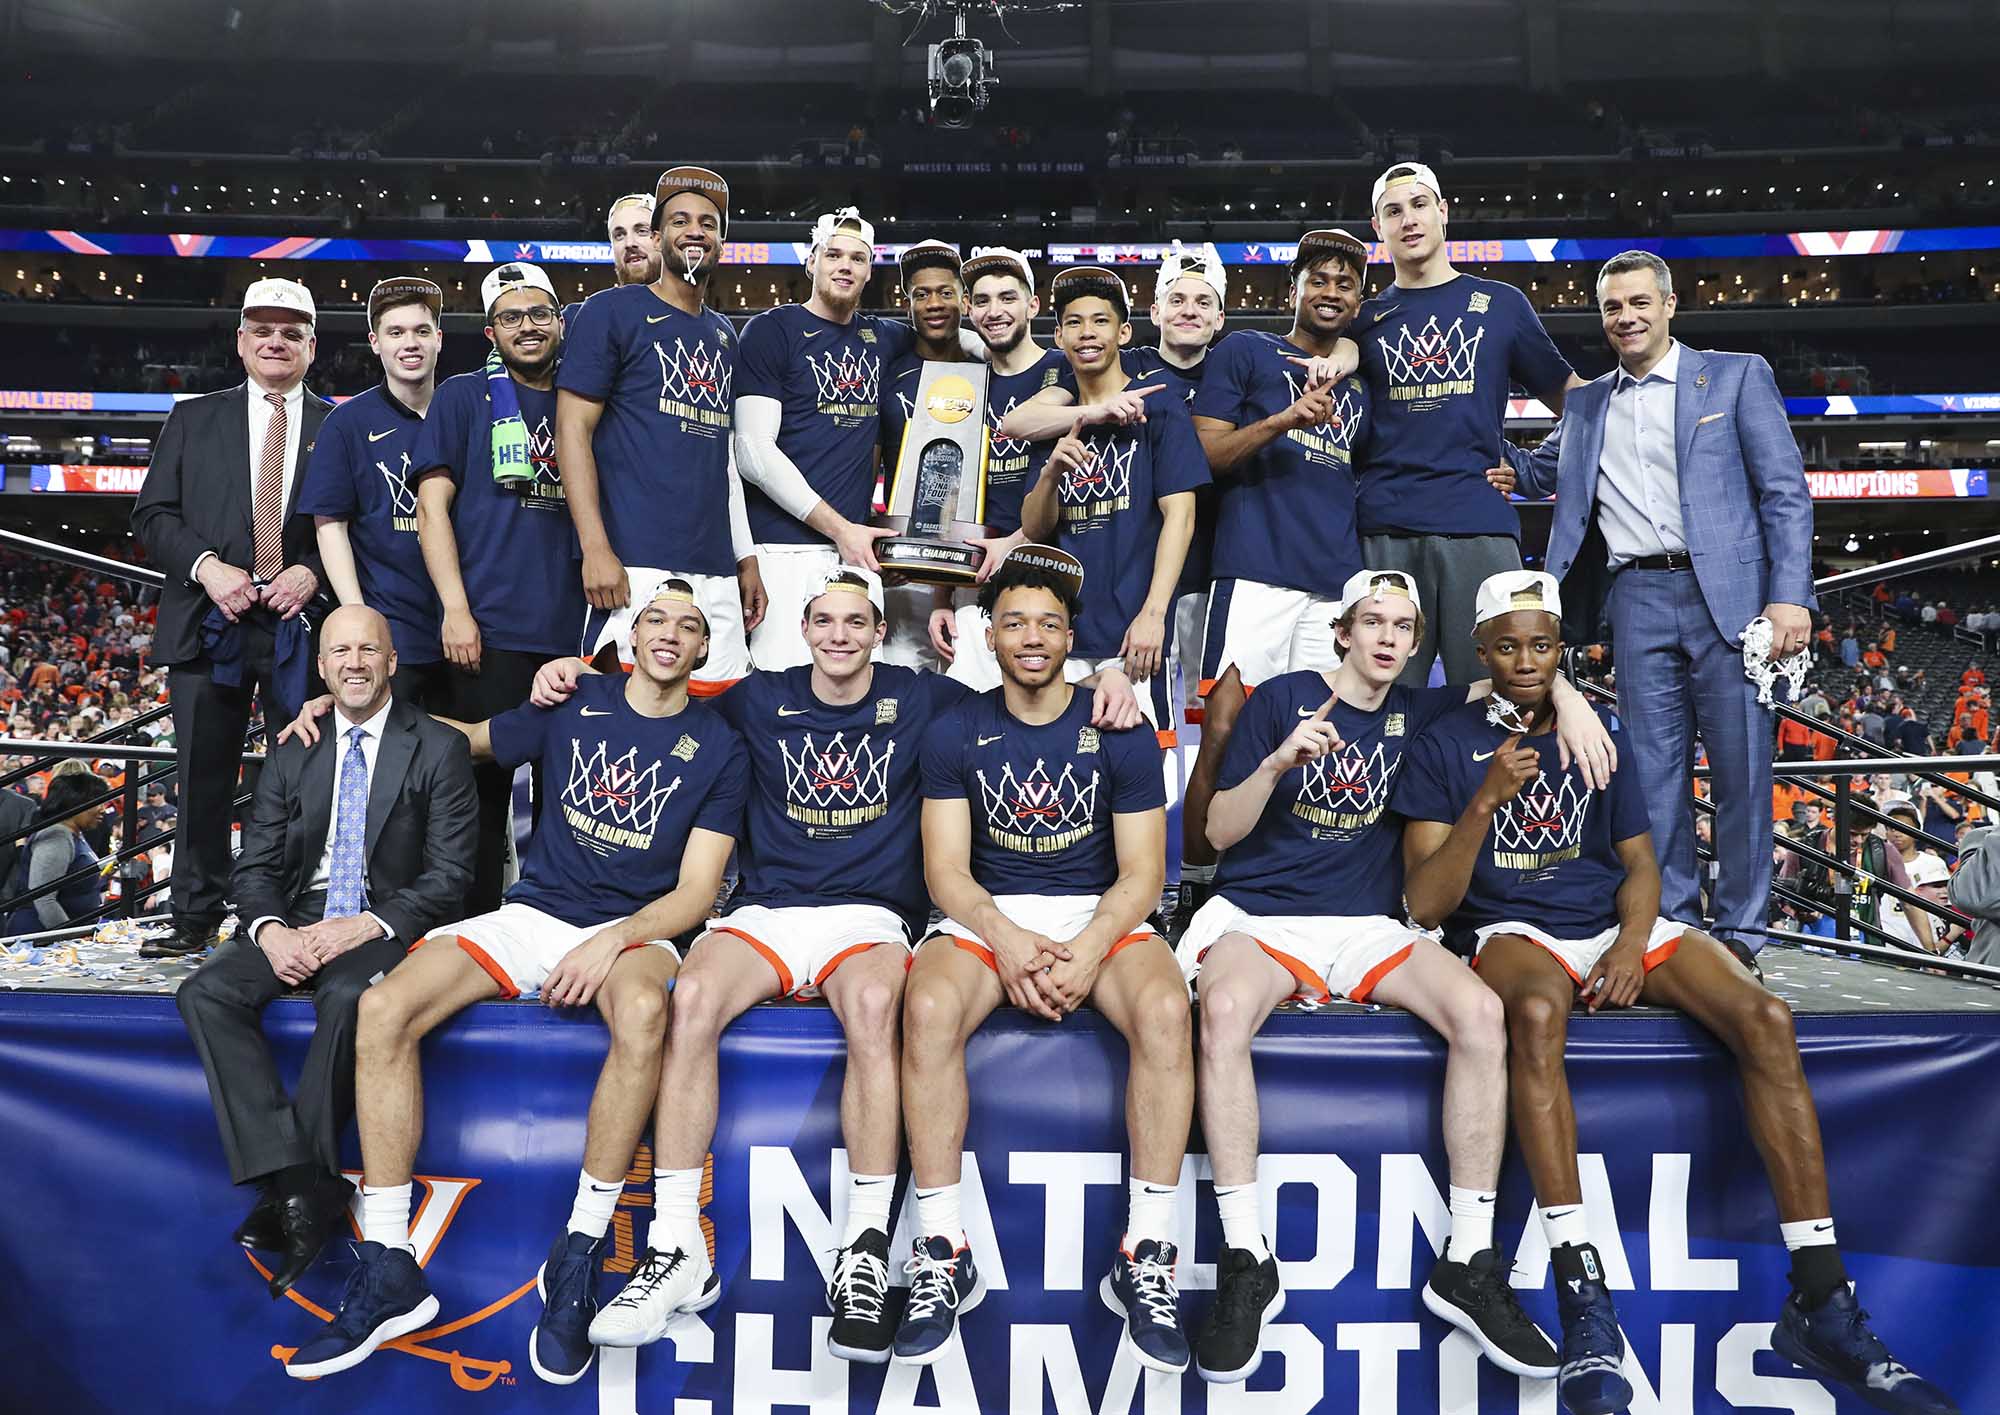 UVA Mens Basketball team sitting on stage holding trophy from their National Championship win